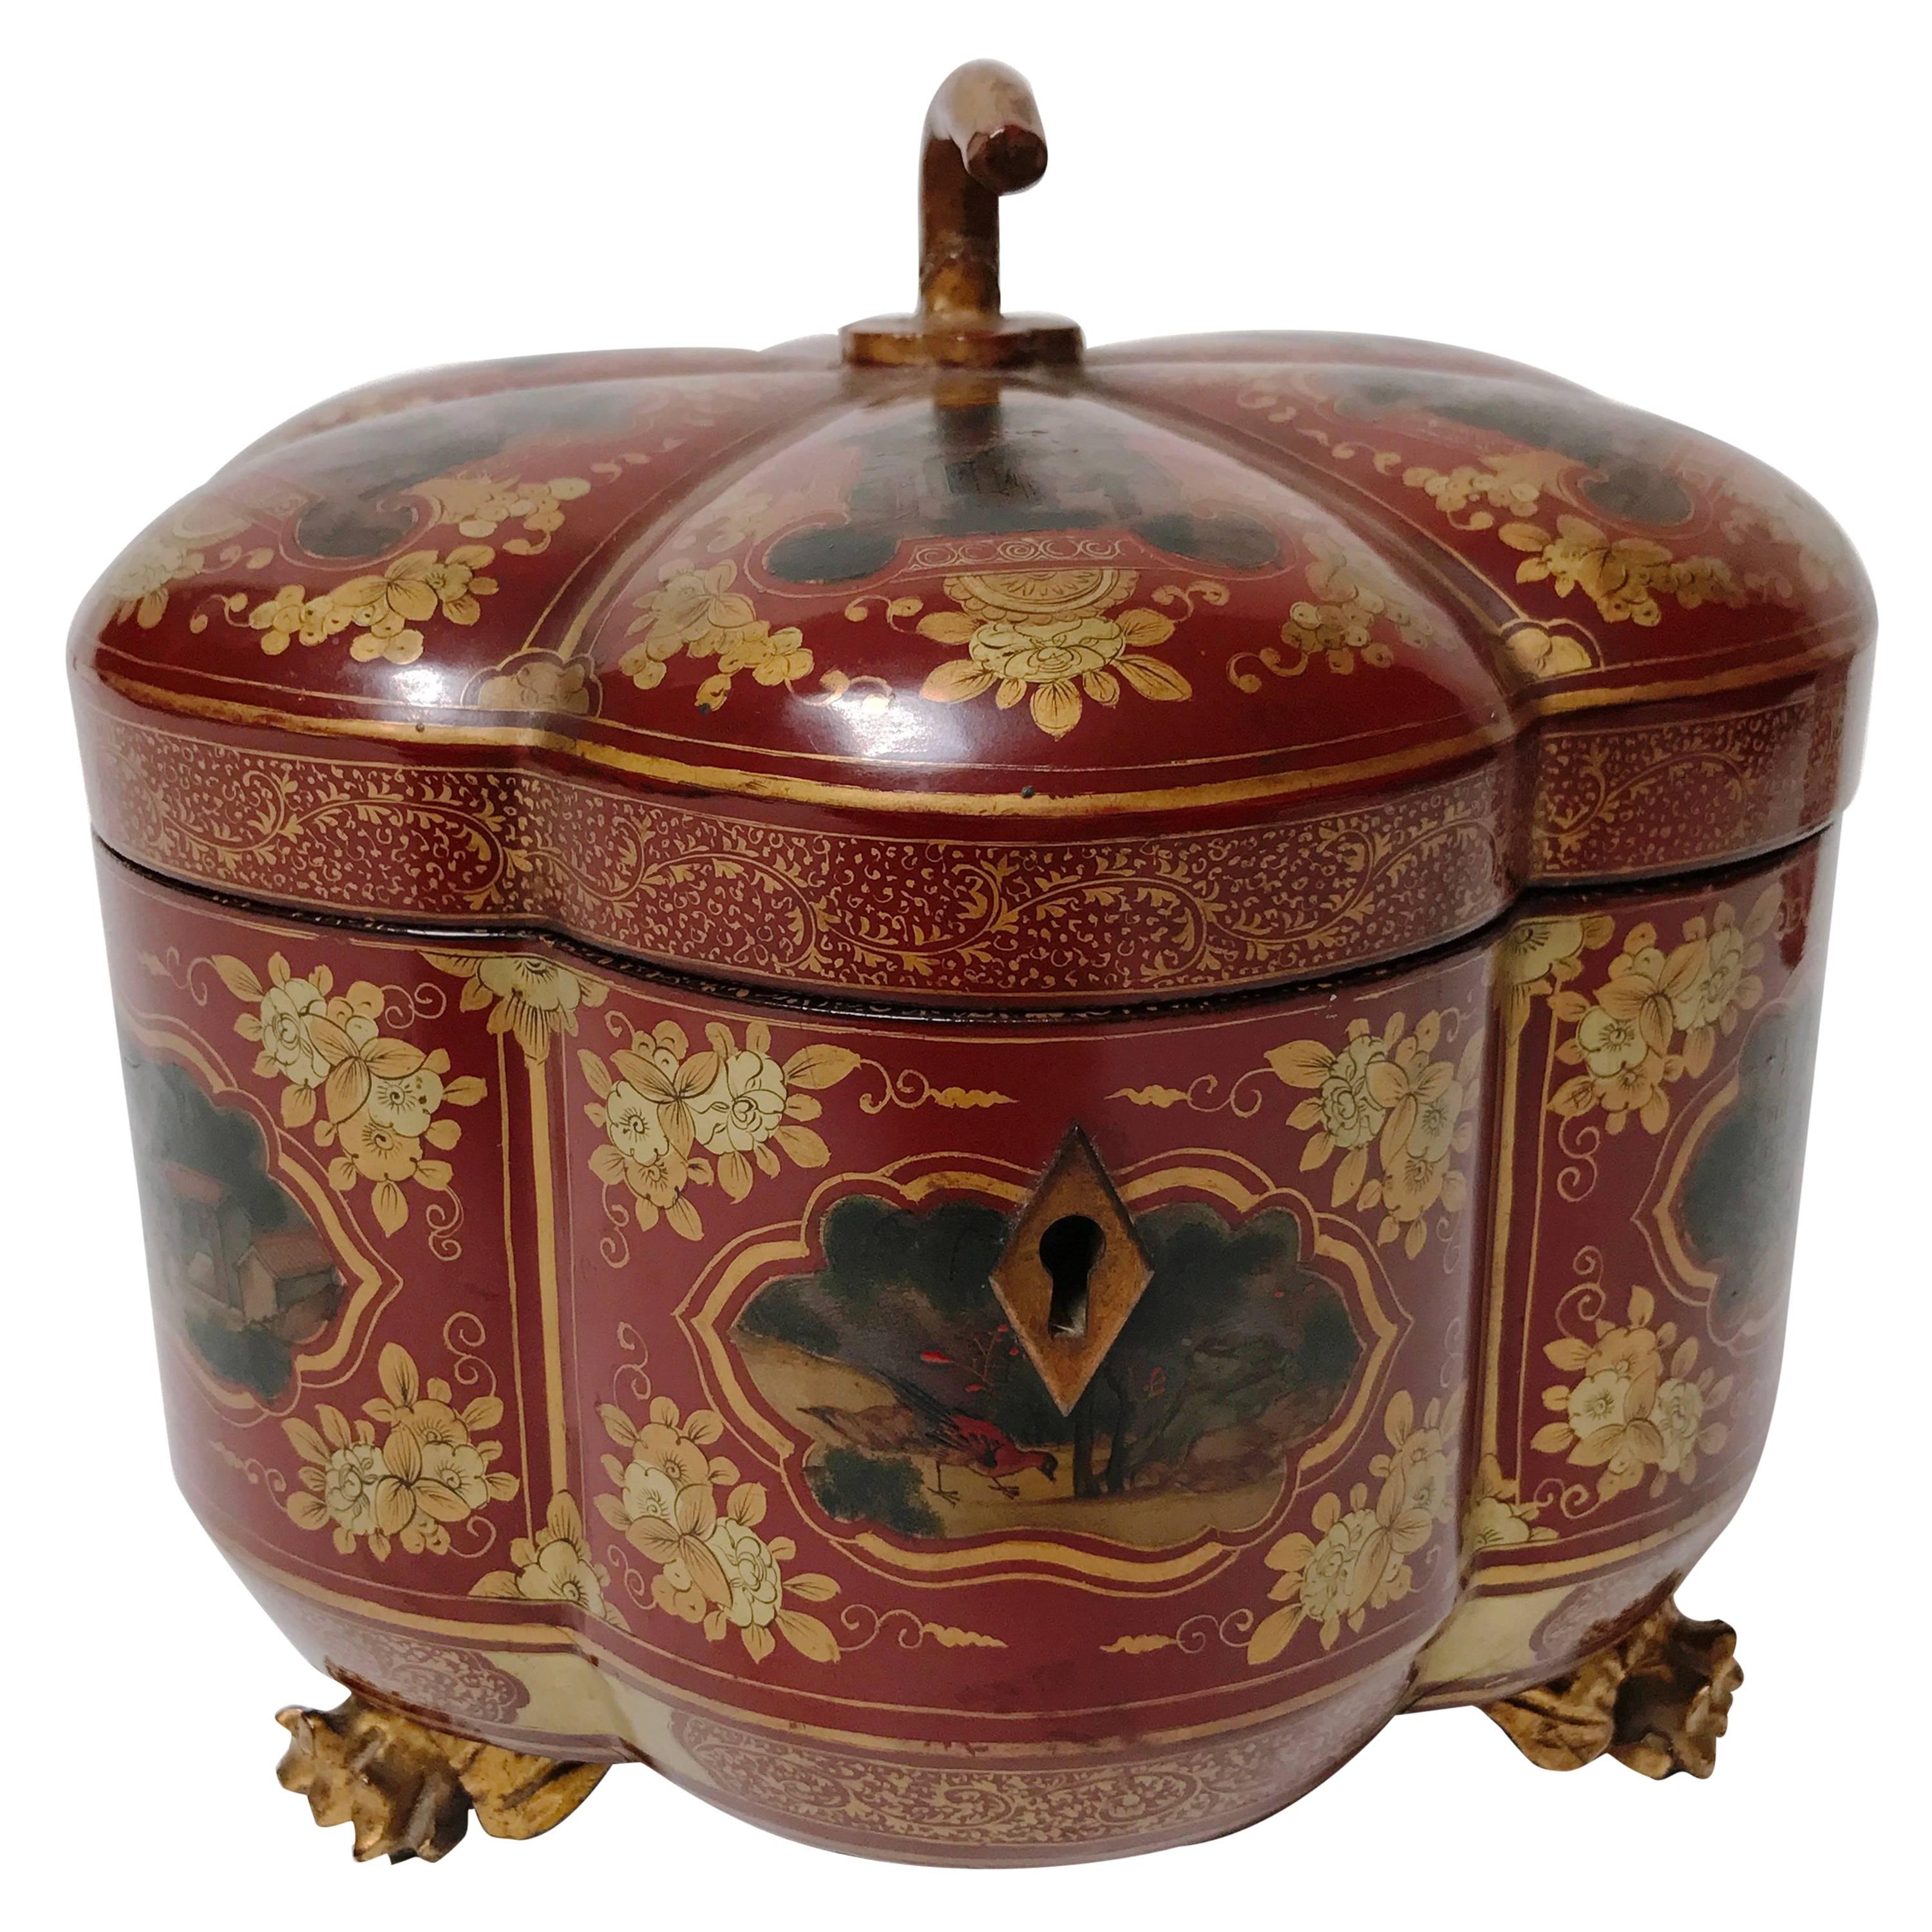 Chinese Export Melon Form Tea Caddy